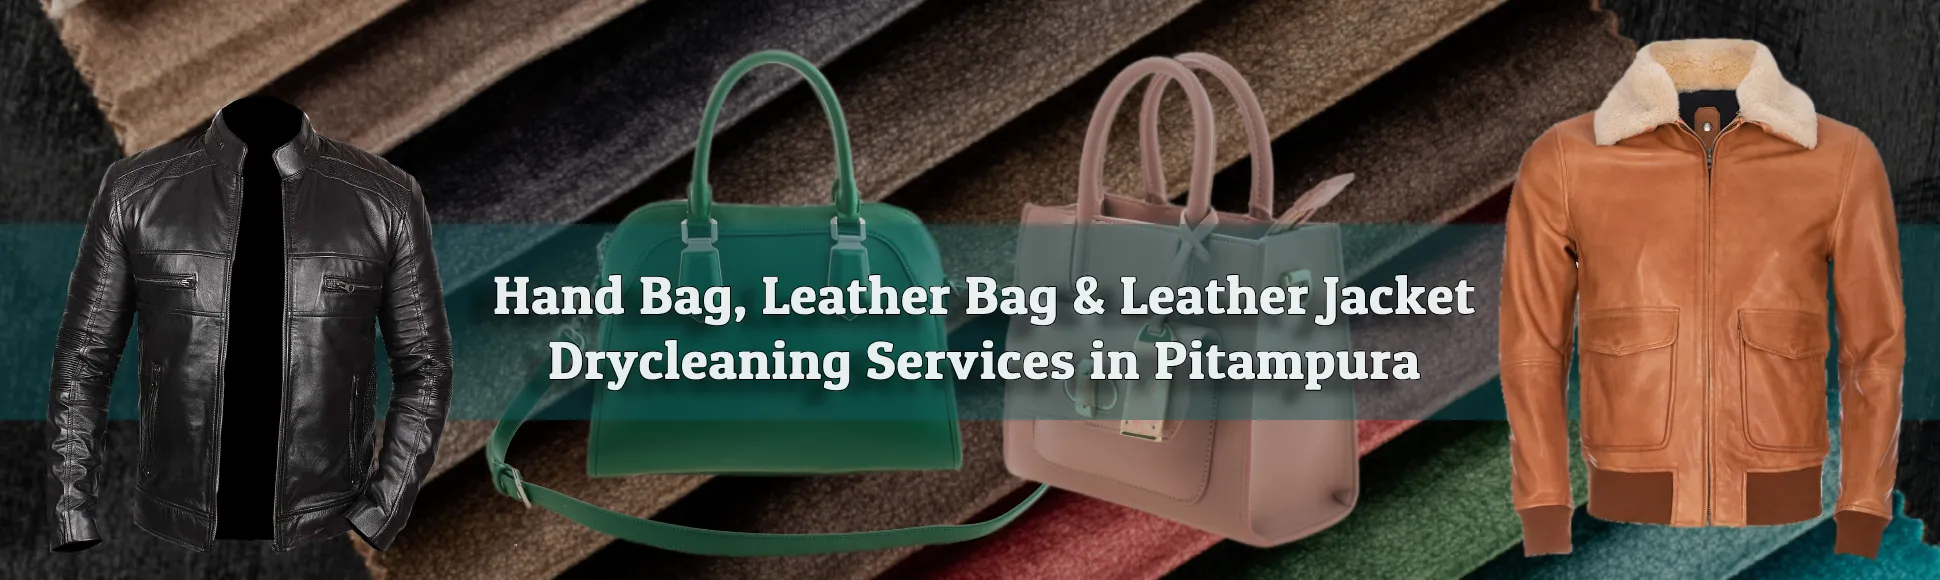 Should We Dry Clean Leather Jacket And Wedding Dress? - Singapore Laundry  Services